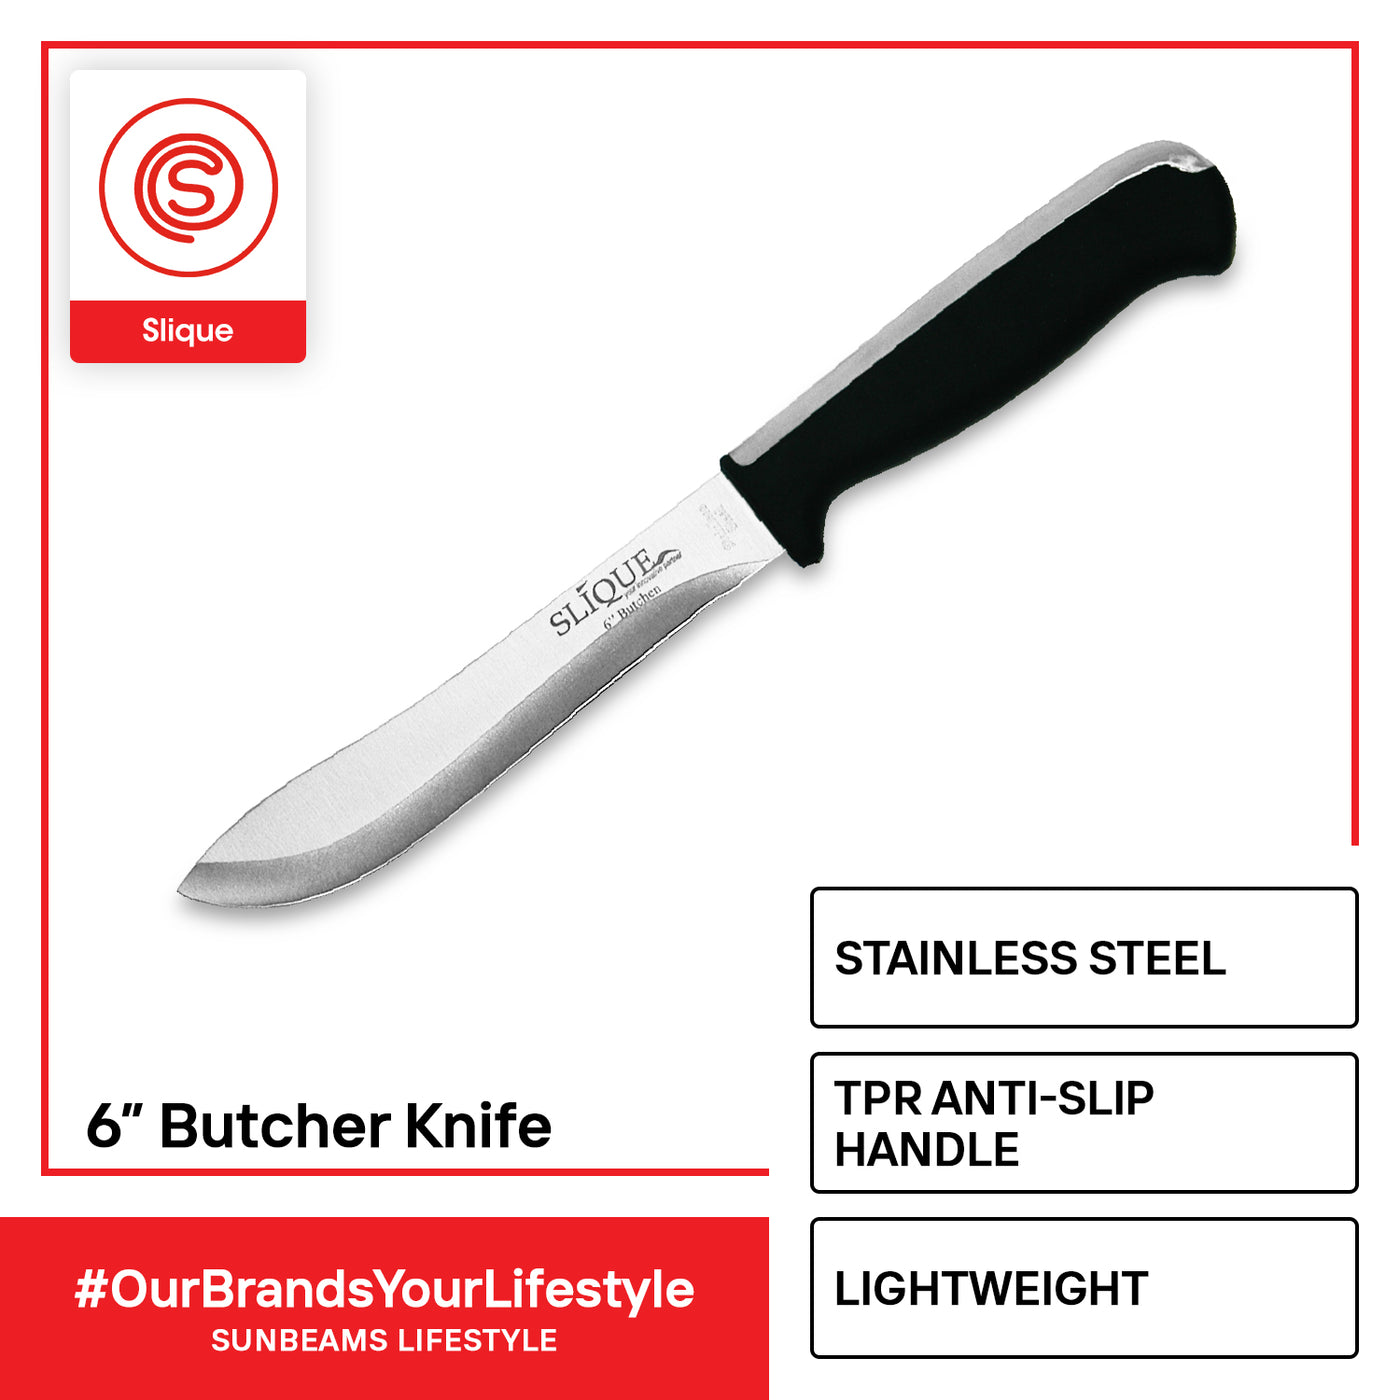 SLIQUE Premium Stainless Steel Butcher Knife 6" TPR Anti-Slip Handle  Amazing Gift Idea For Any Occasion!